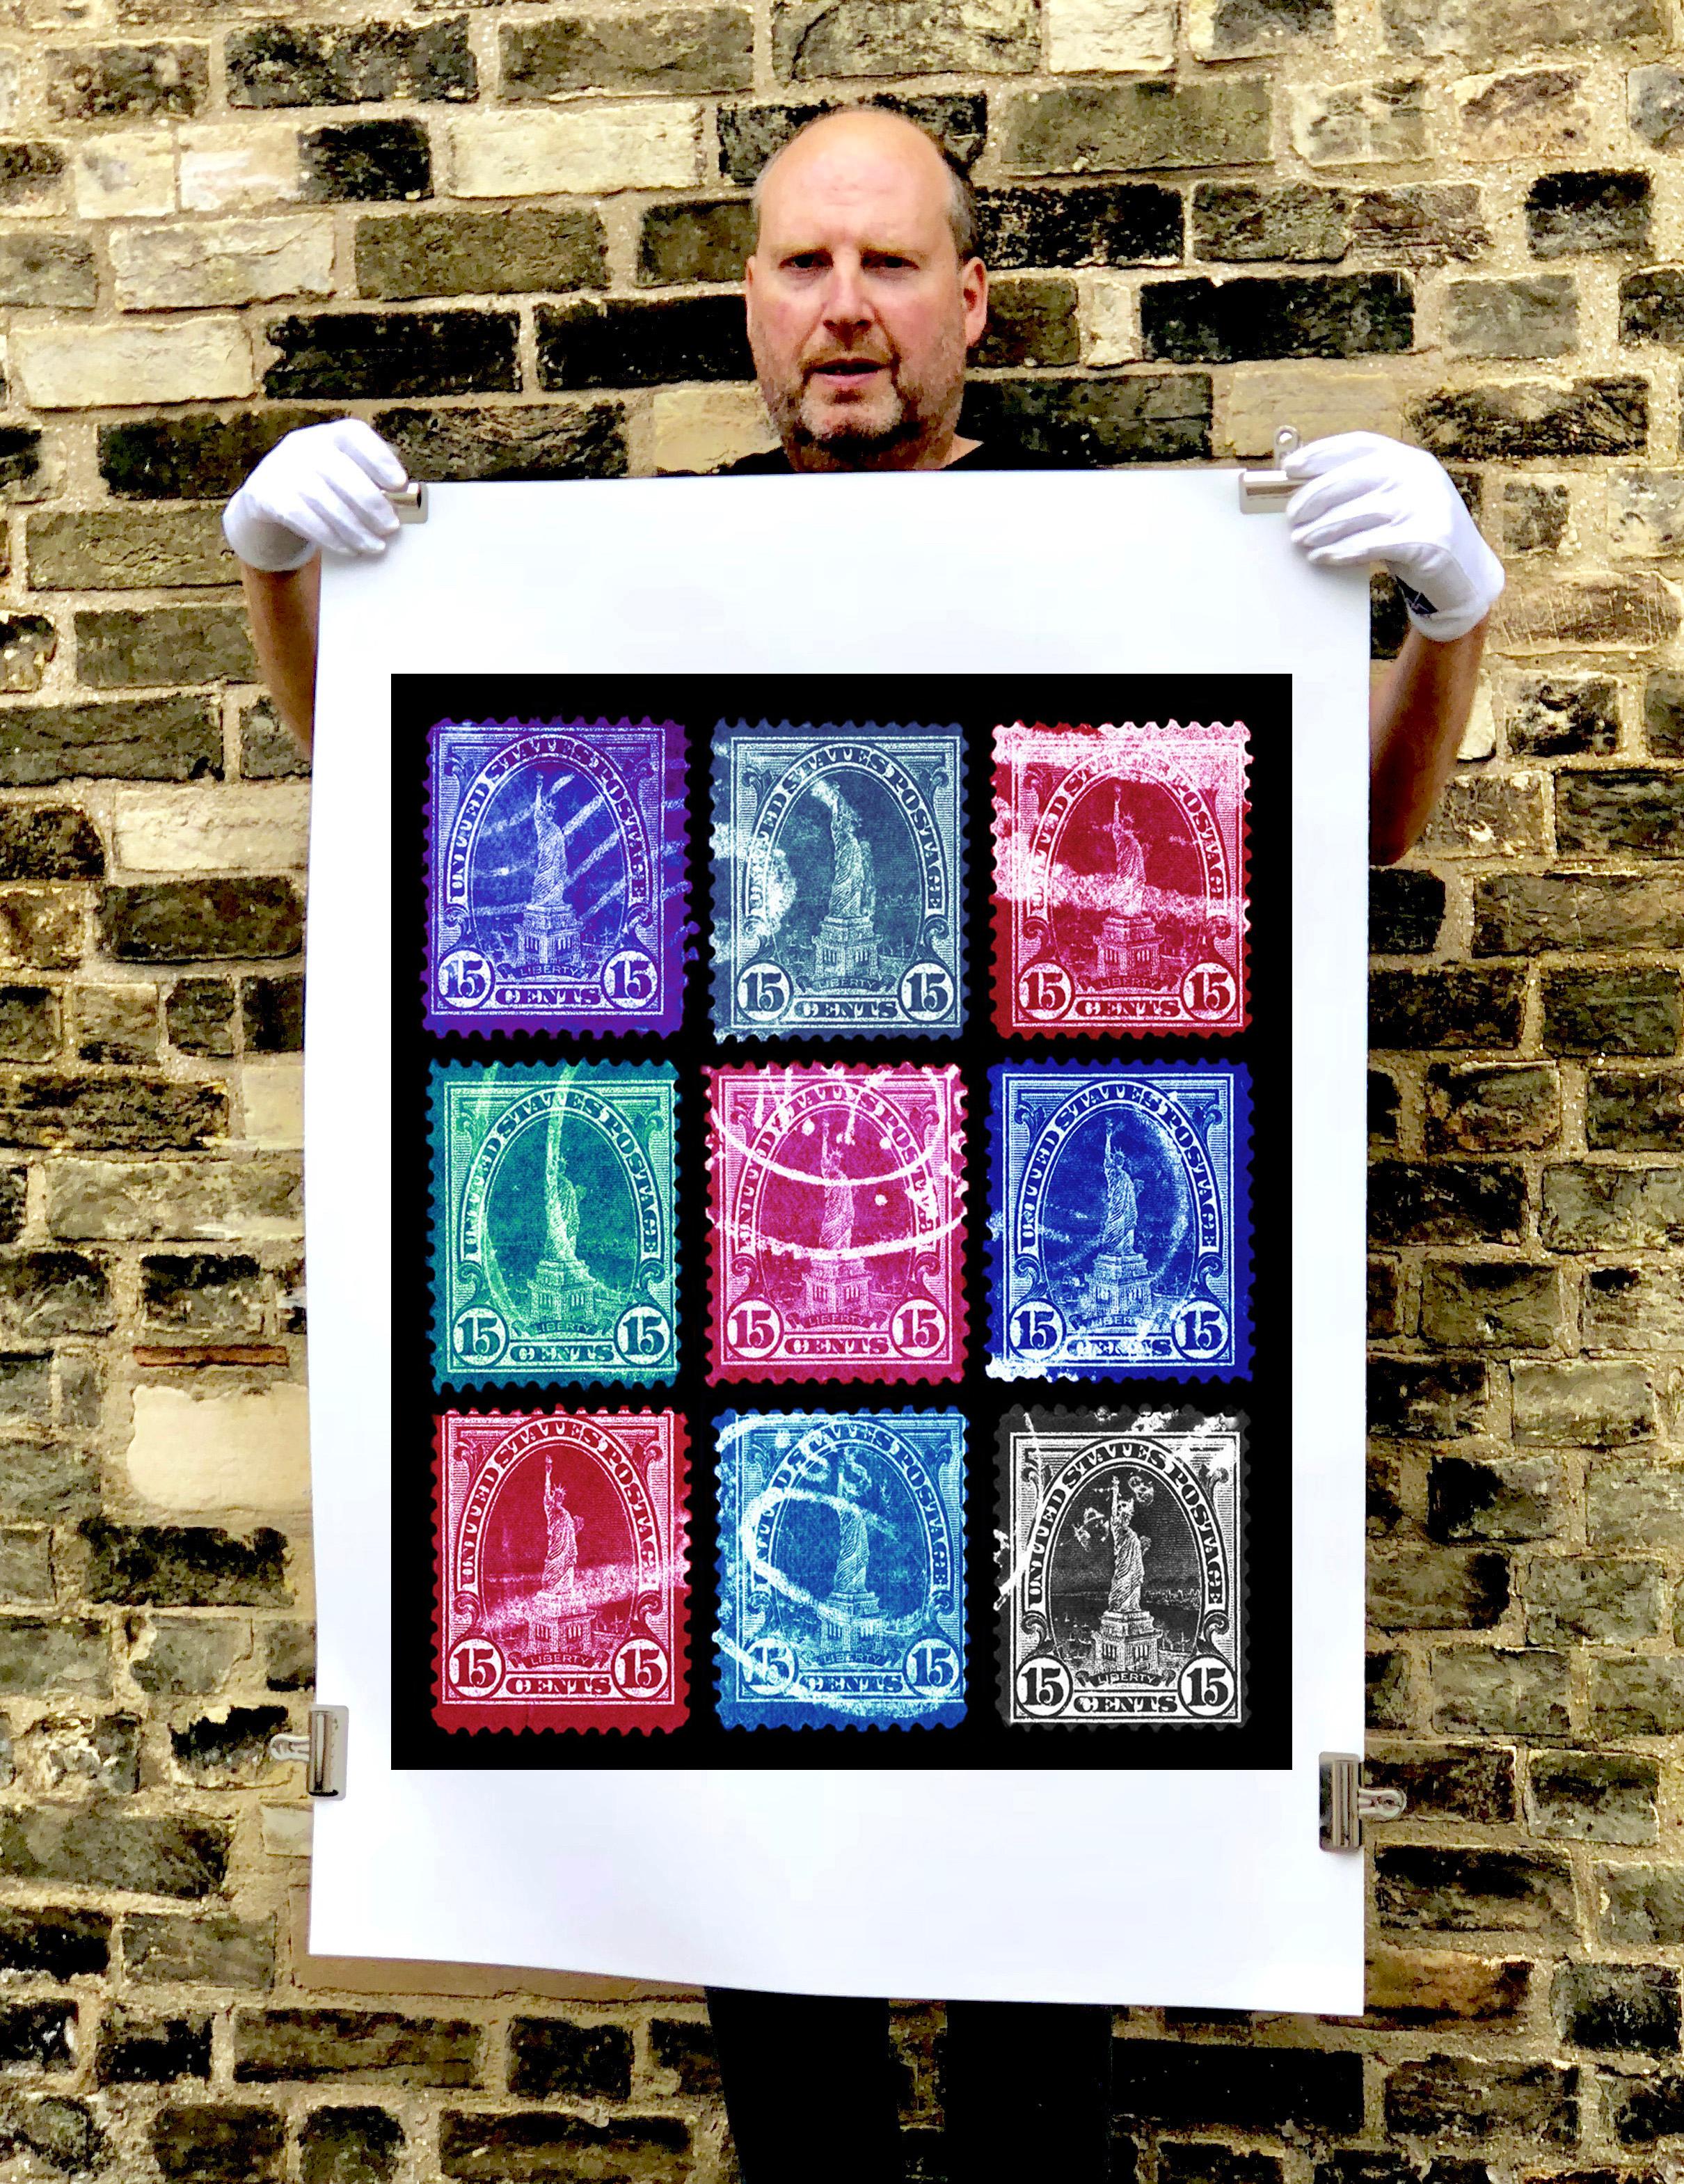 Liberty Multi-Colour Mosaic, from the Heidler & Heeps American Stamp Collection, these historic postage stamps are given a twenty-first century pop art lease of life.

This artwork is a limited edition of 25, gloss photographic print, dry-mounted to